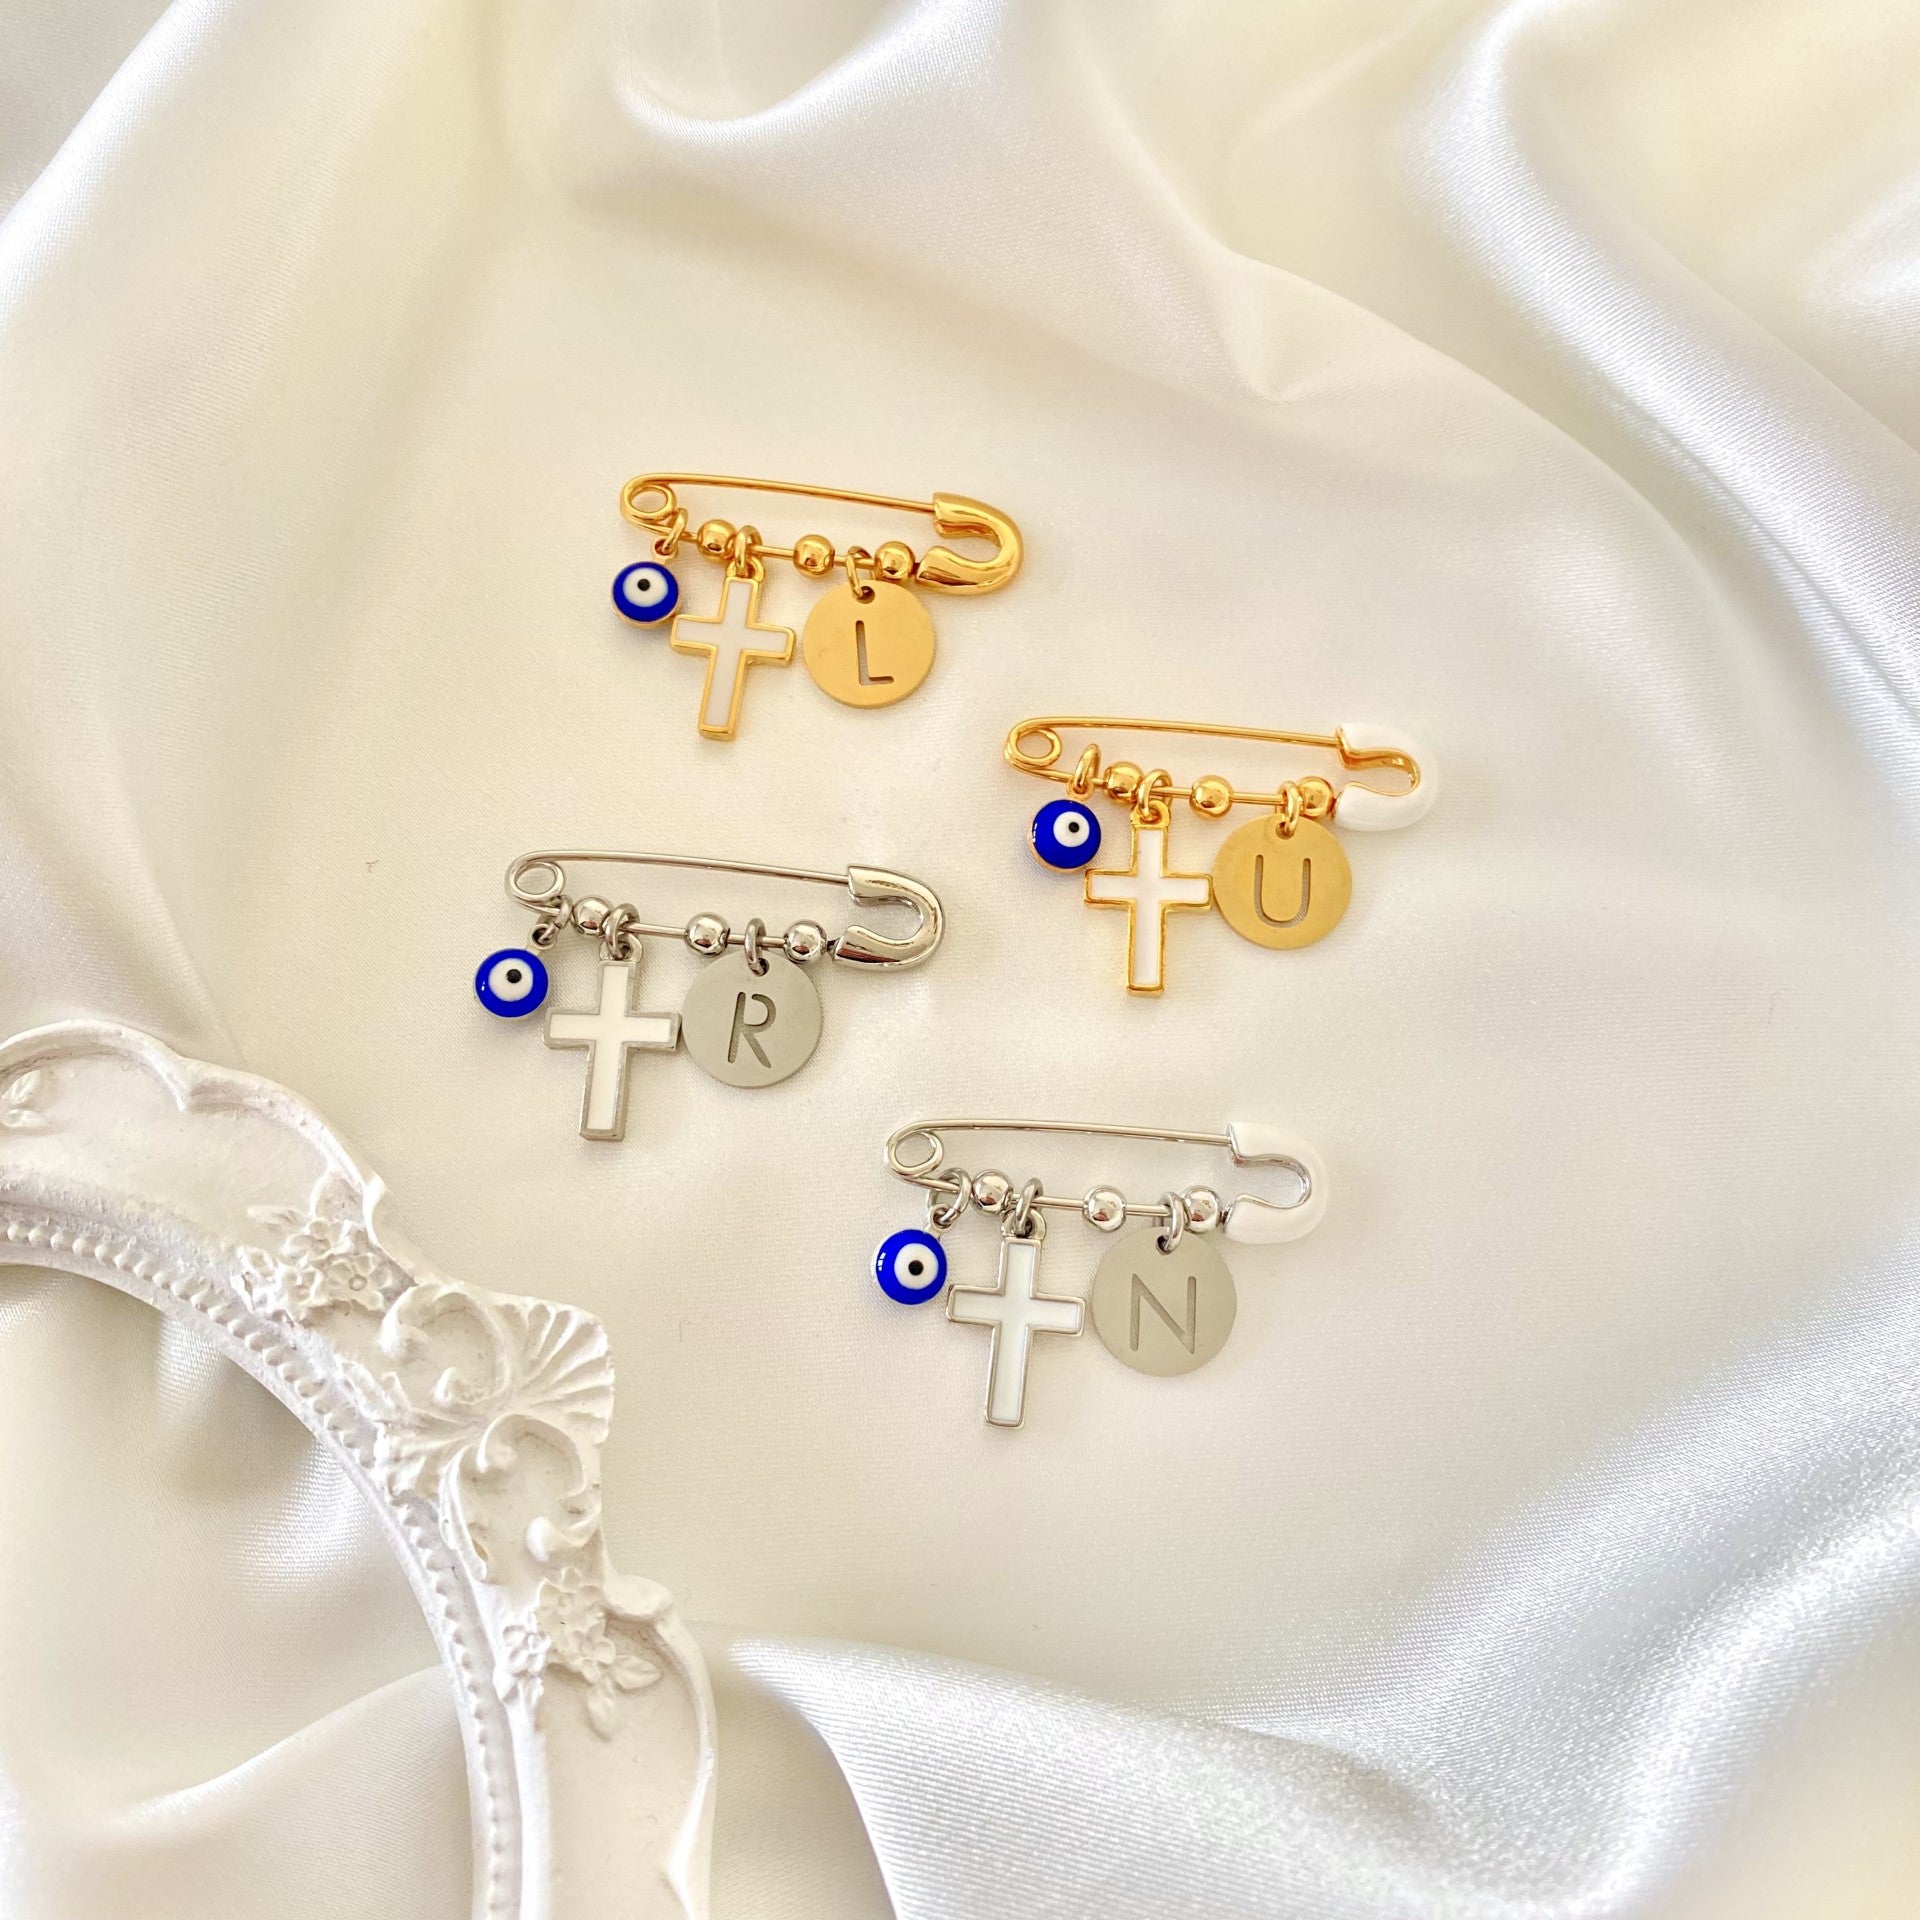 The Cross Set Charms And Pins